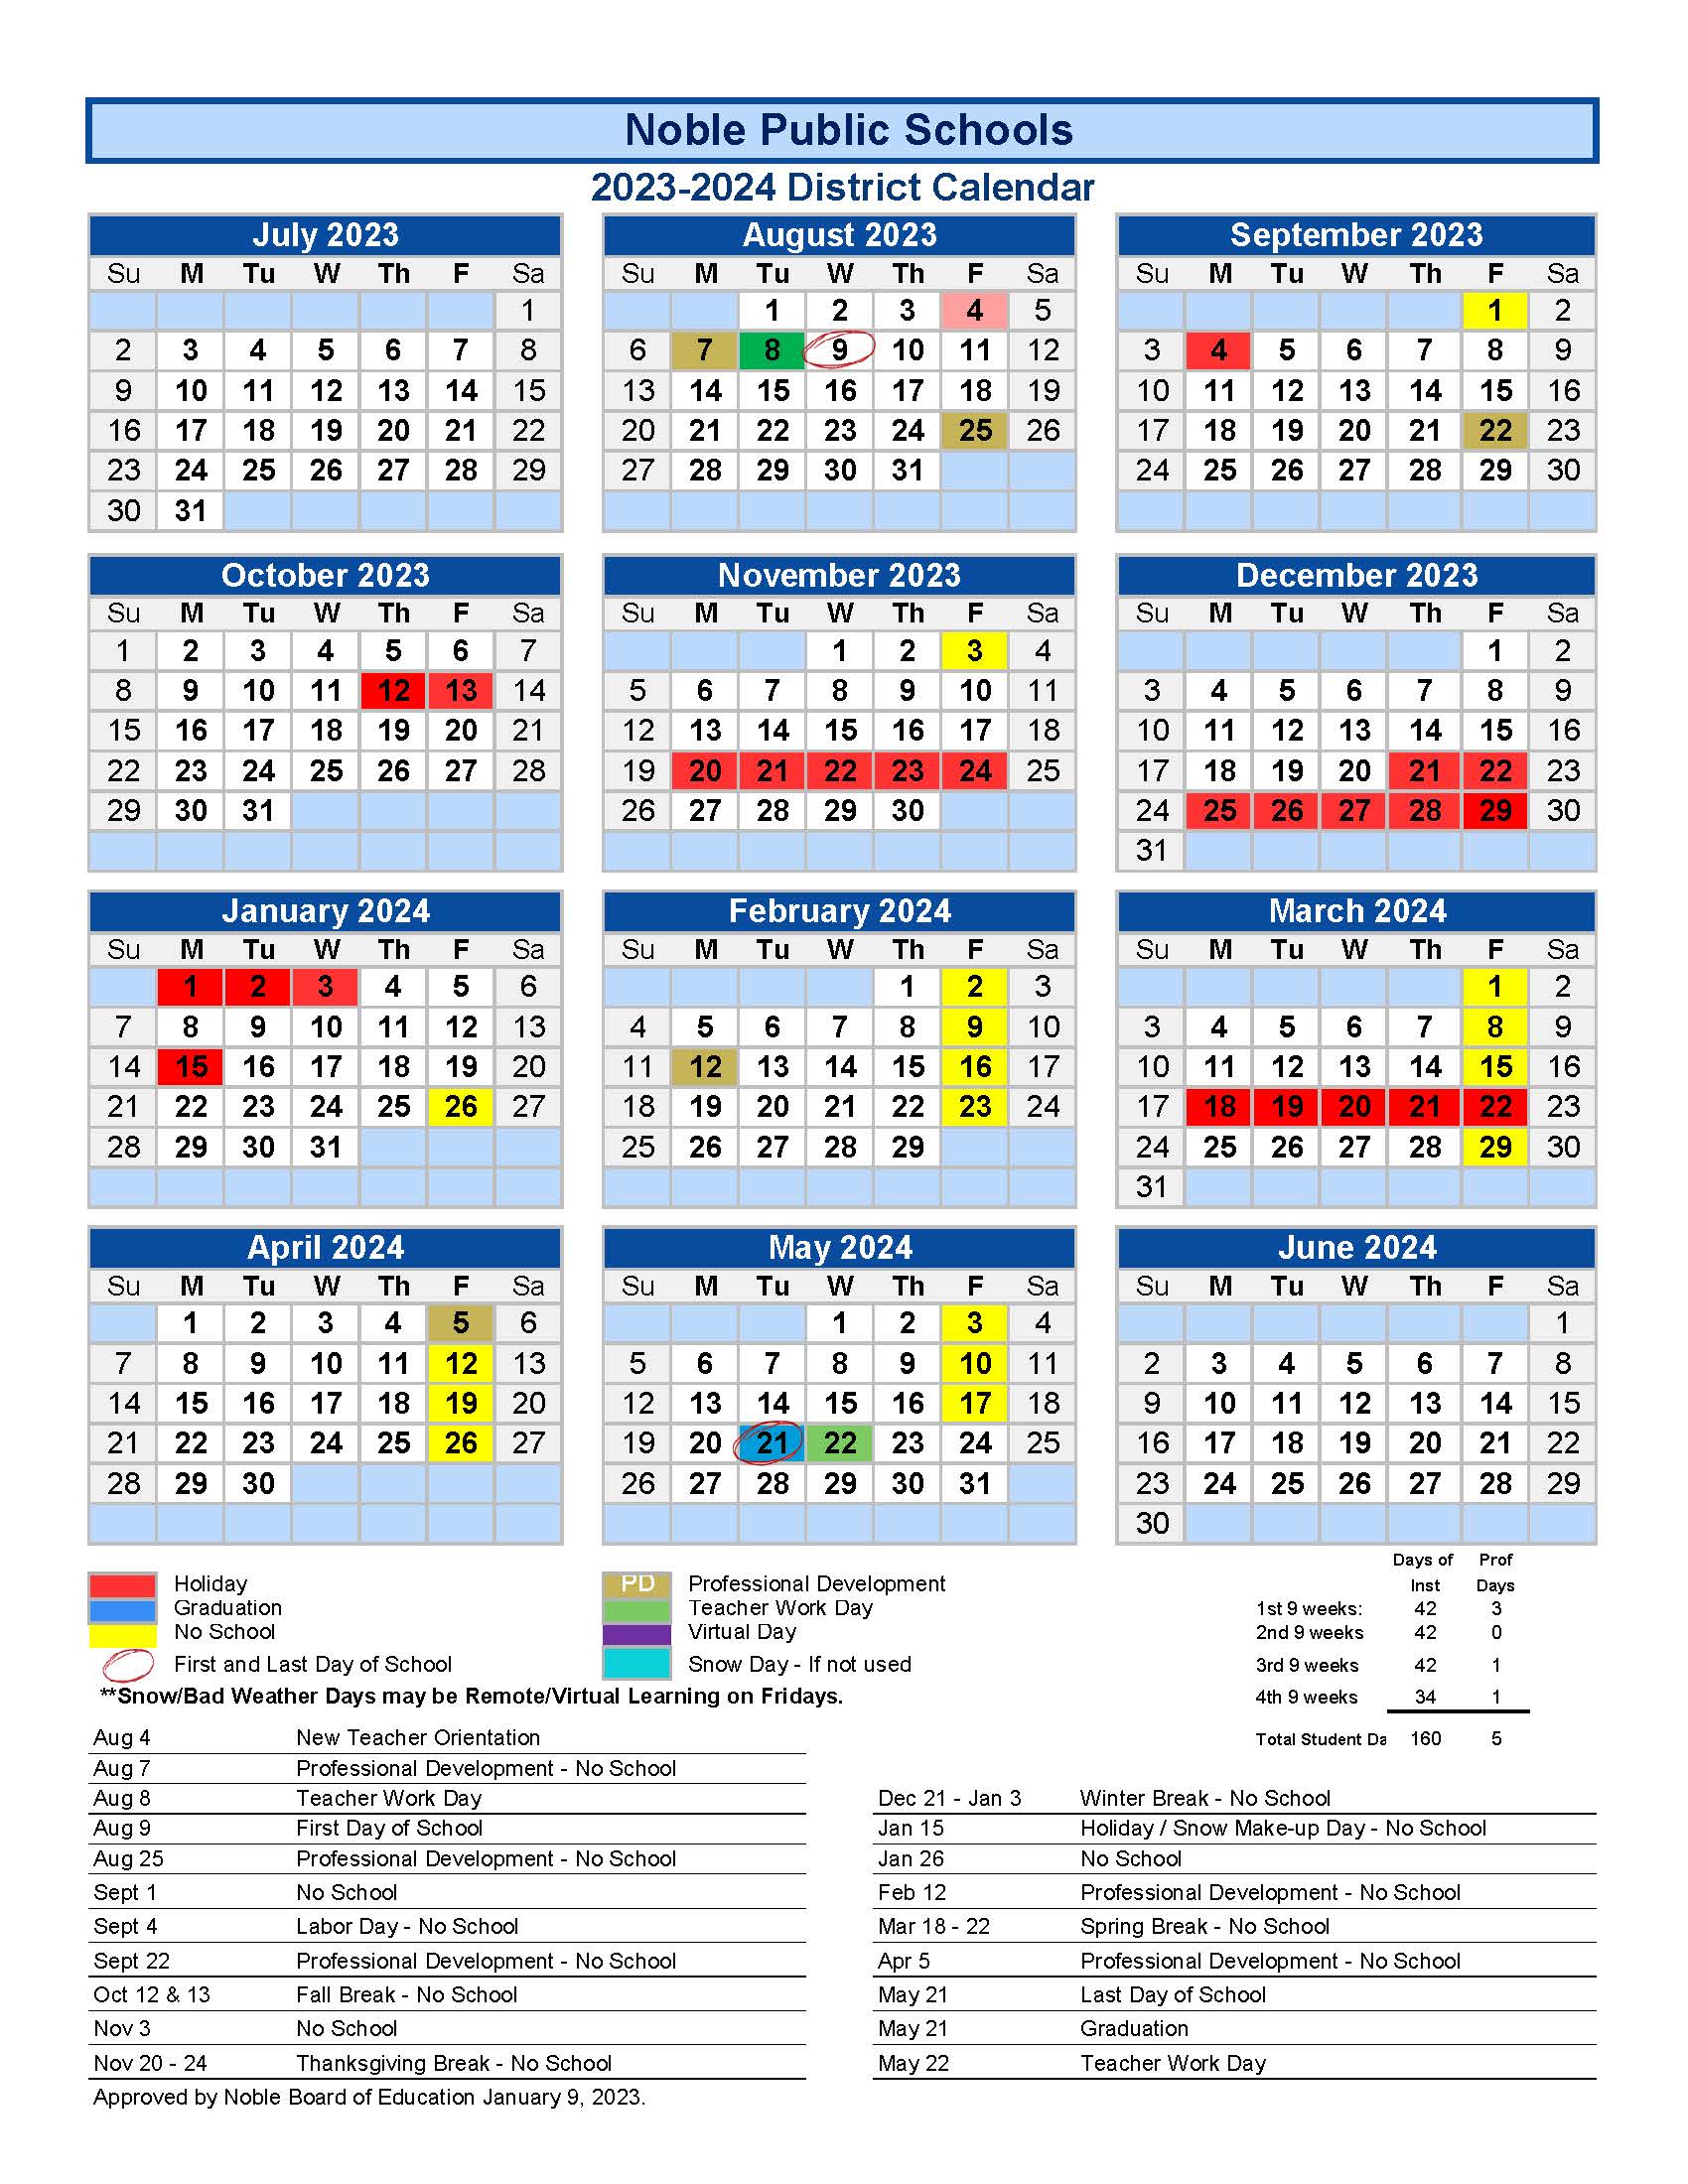 2023-2024 District Calendar -Board approved 1.9.2023